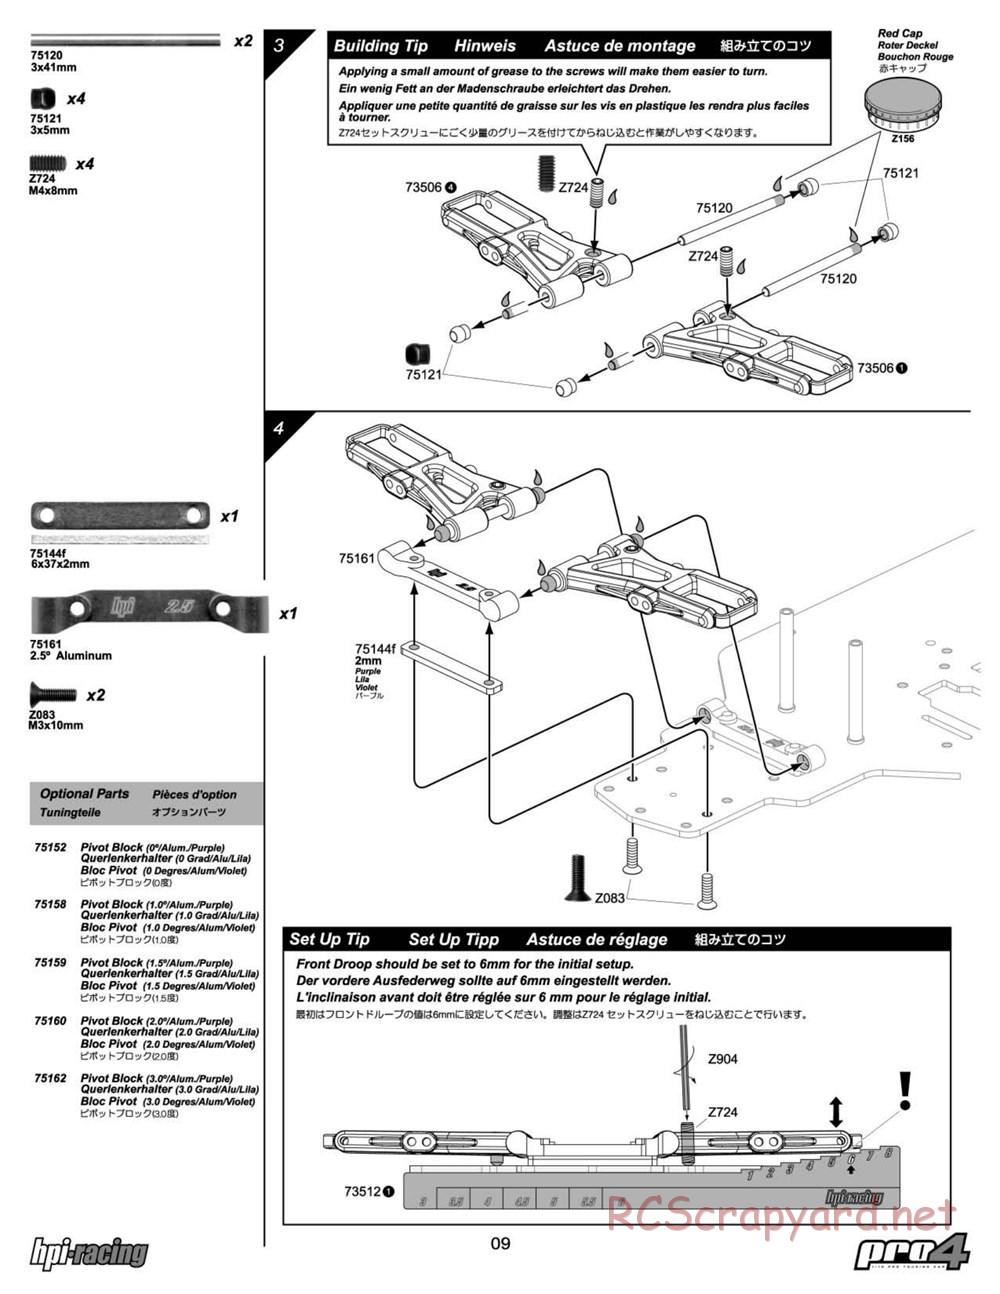 HPI - RS4 Pro4 - Manual - Page 9